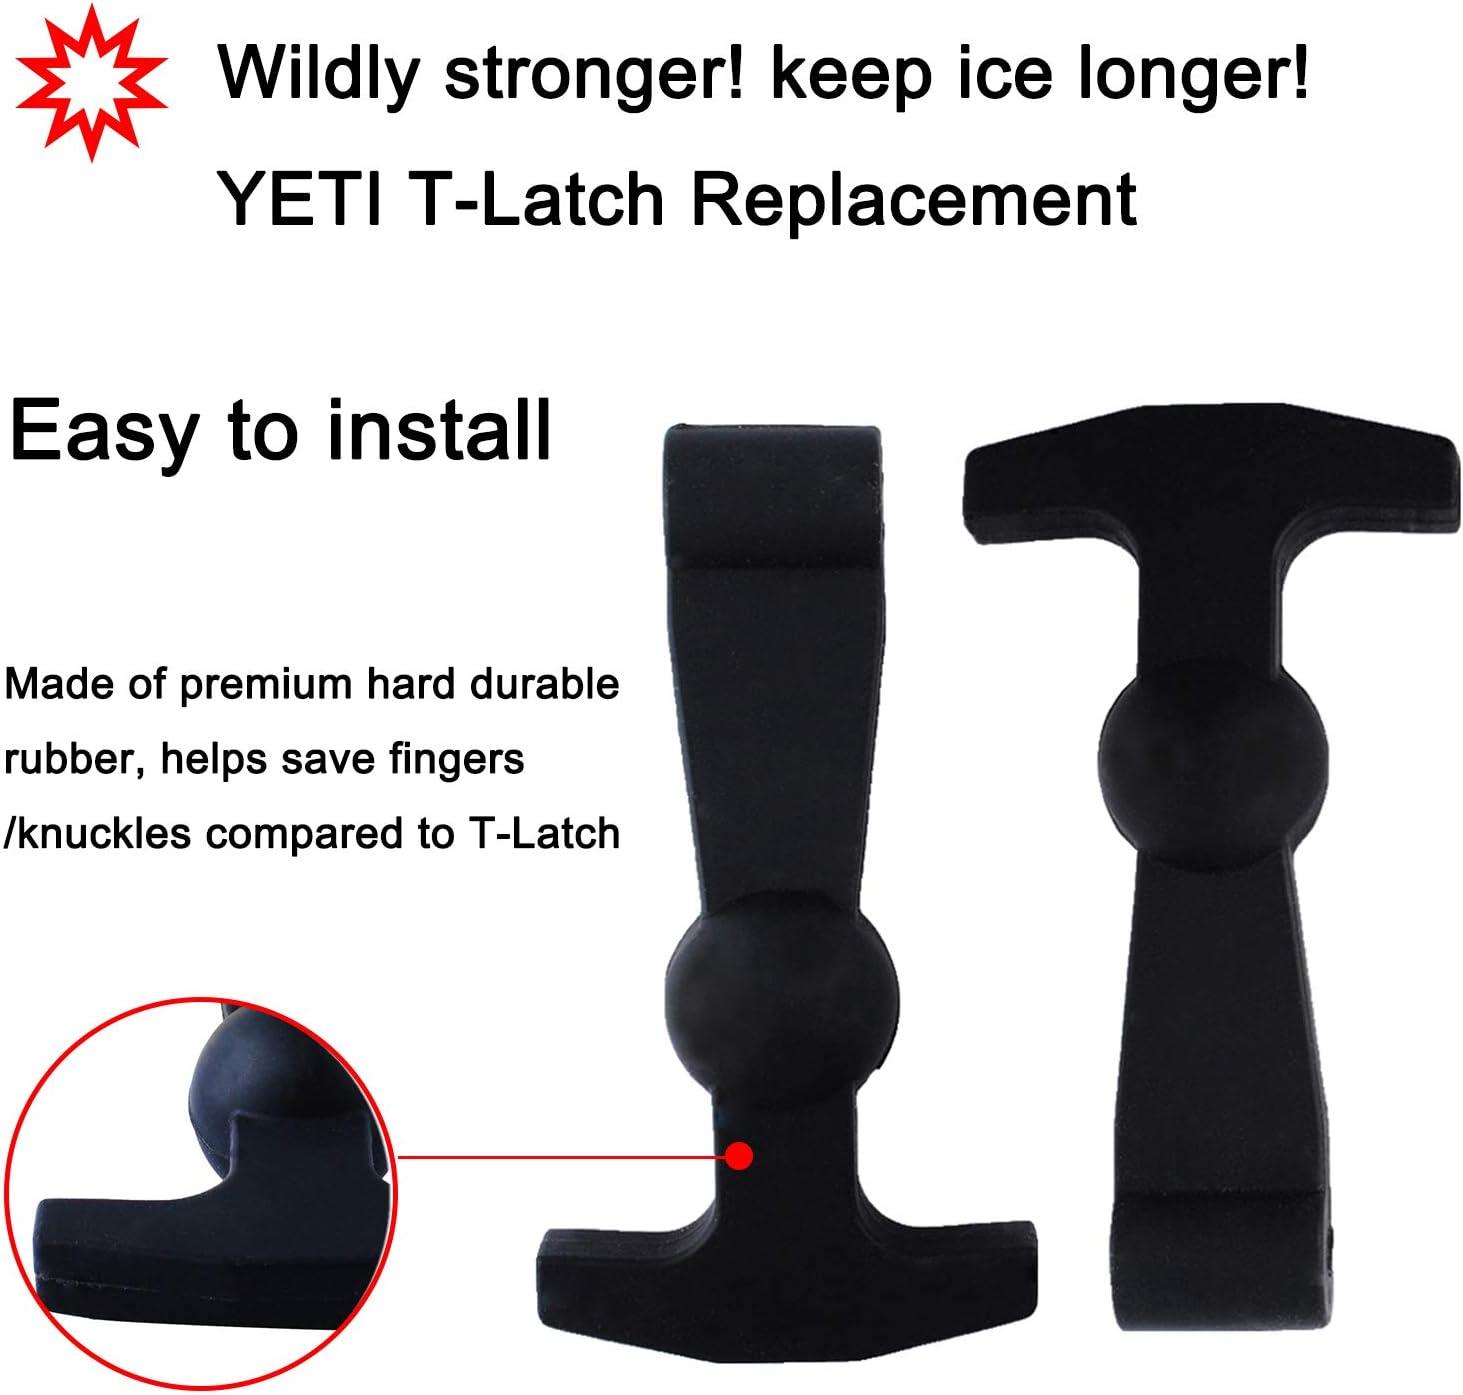  Cooler Latches Replacement for Yeti, RTIC, Lid Latch